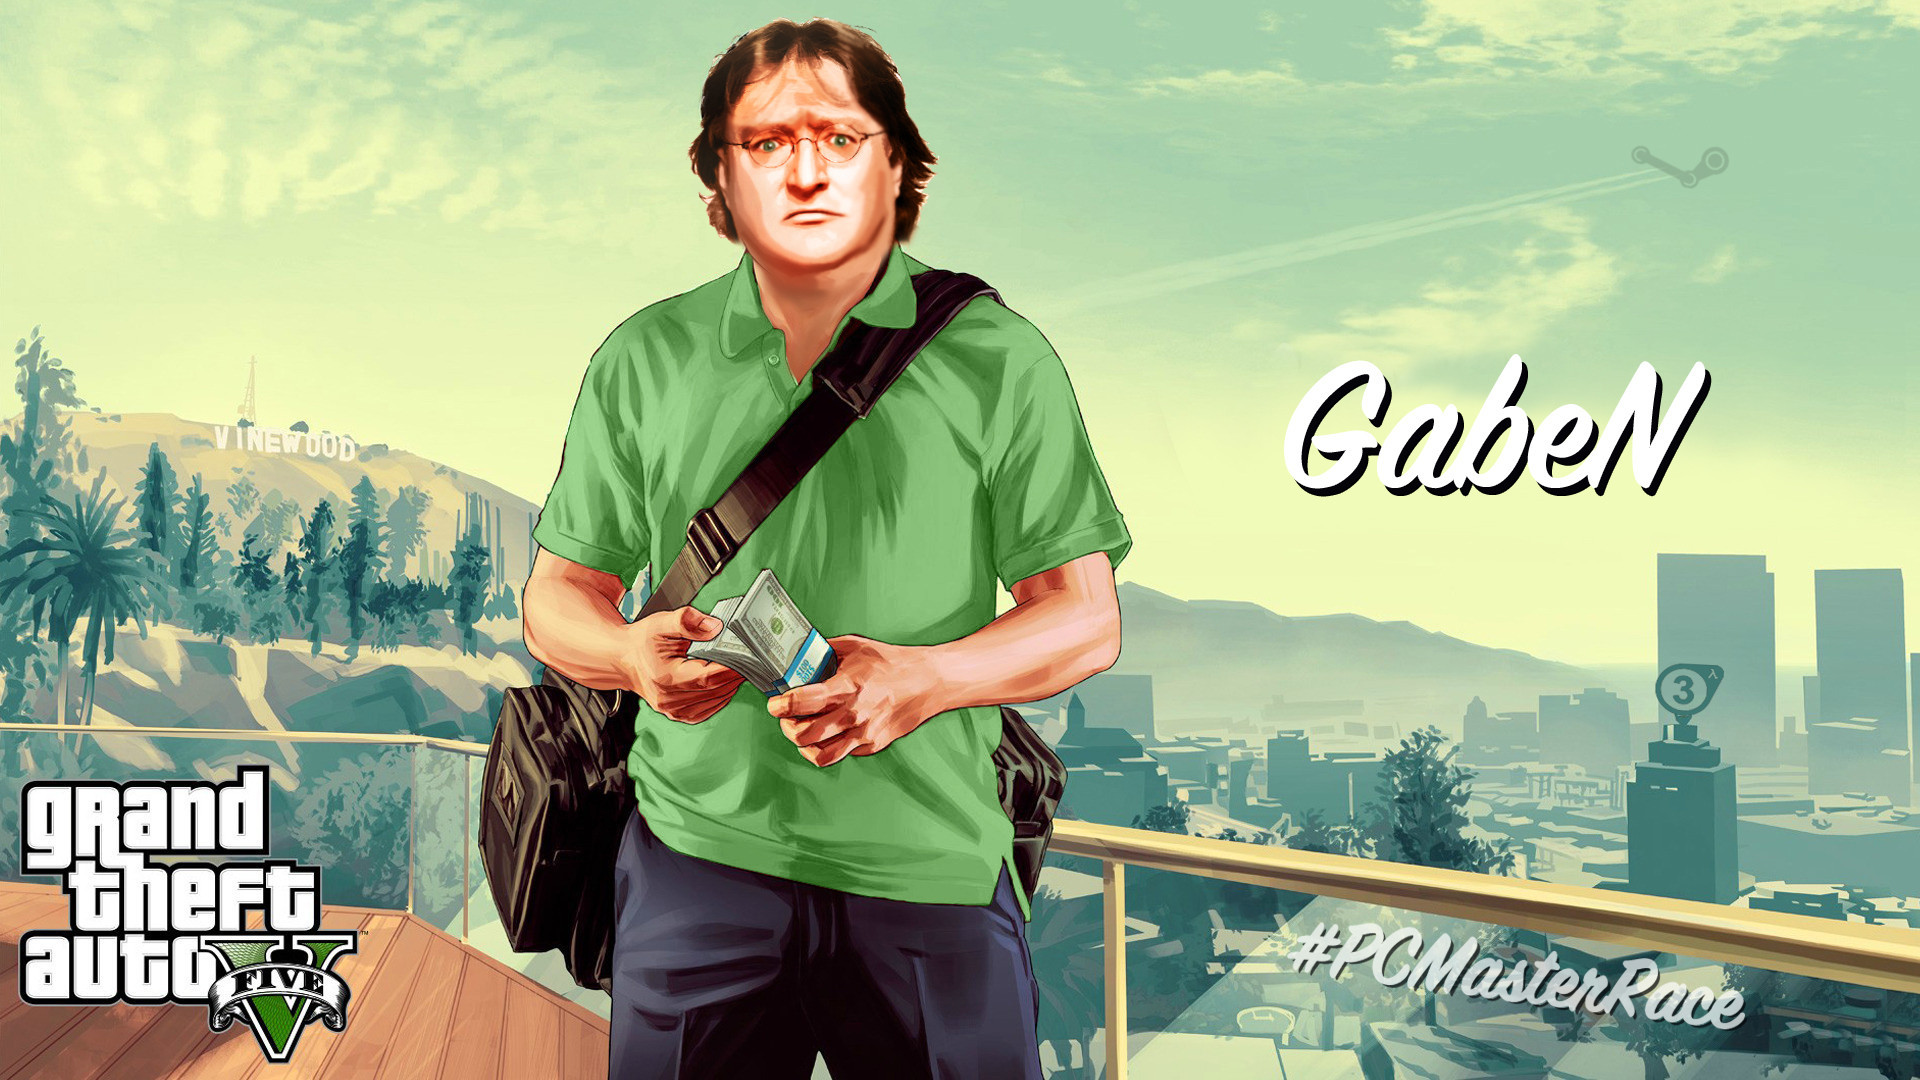 I Made A Glorious Gaben Gta 5 Wallpaper For All Of Lord And Saviour Gaben